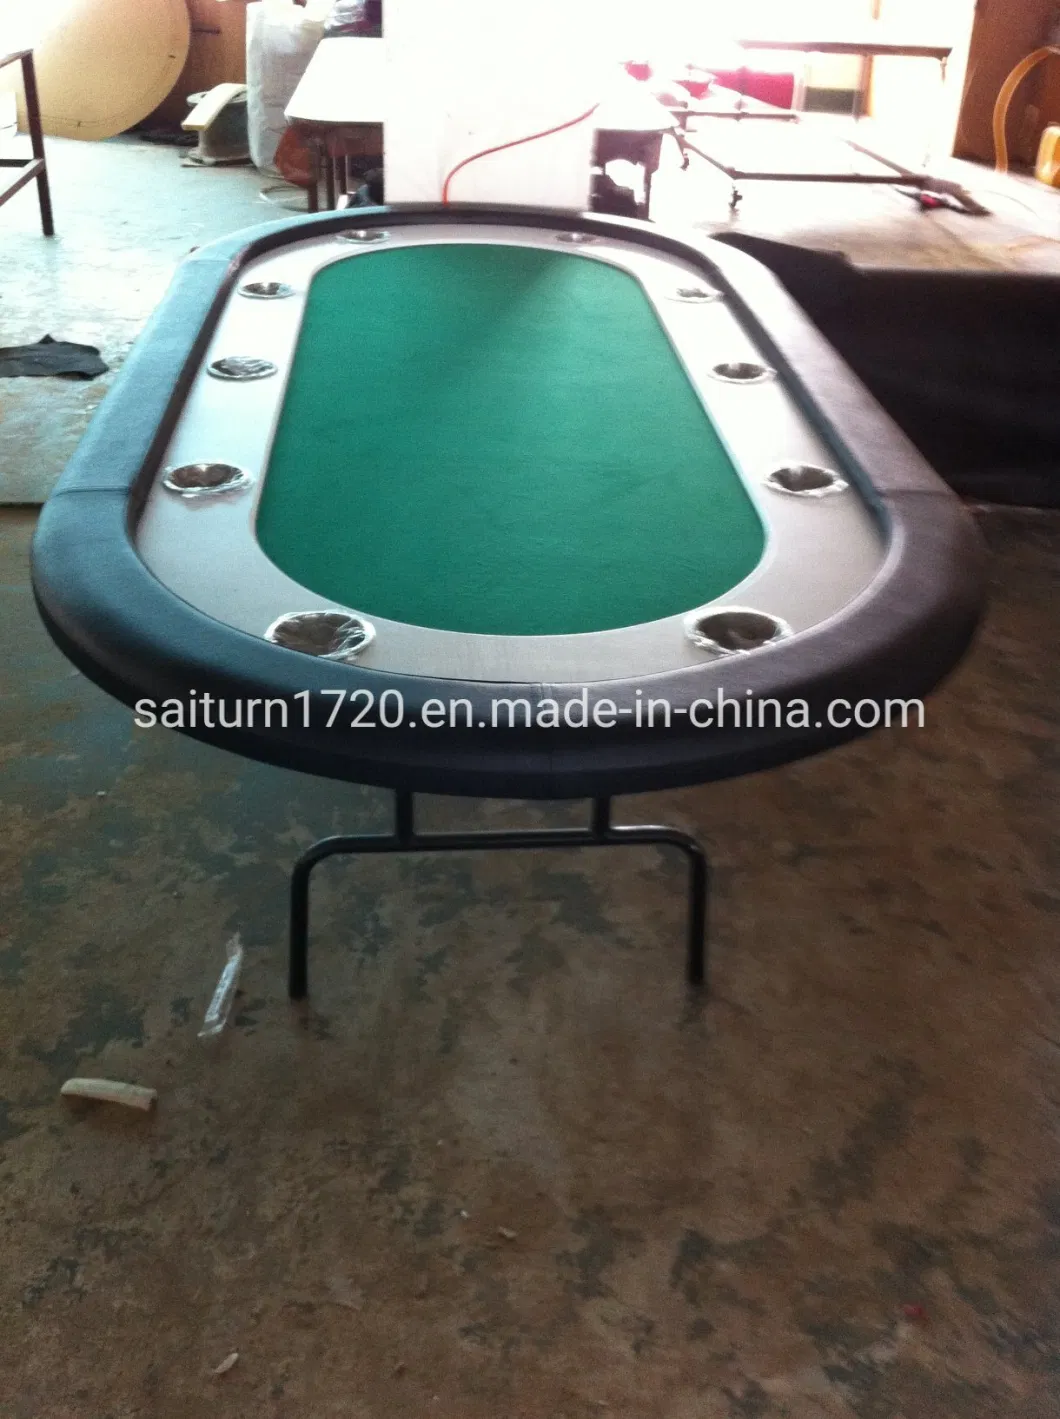 Folding Poker Table with Racetrack for Home and Club Use